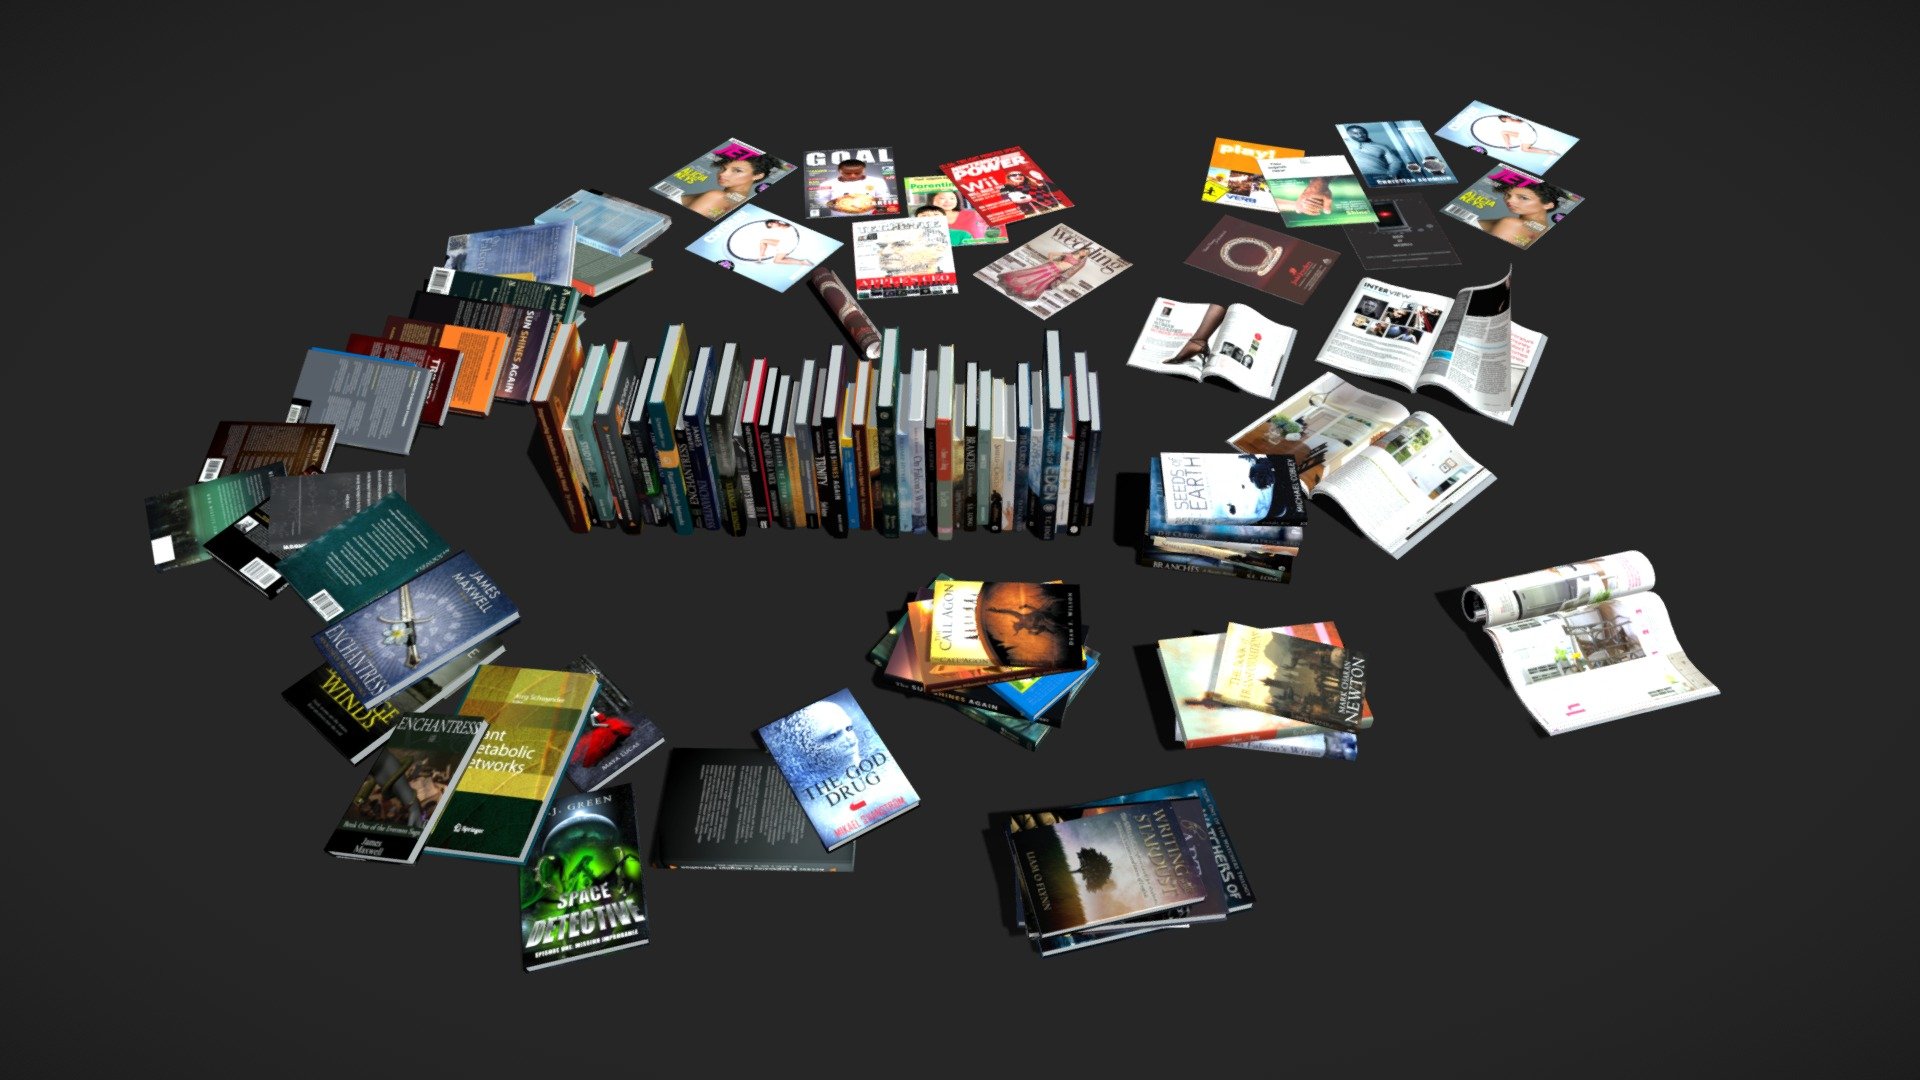 Books and Magazines

PBR Materials.

Textures in 6K.

Book and Magazines for

library,
arch viz,
Interior design,
scandinavian style arch viz,
deco design
and details.

Formats:

Blender 3D, 
FBX, 
DAE, 
USDZ, 
OBJ+MTL
+Textures in 6K 3d model